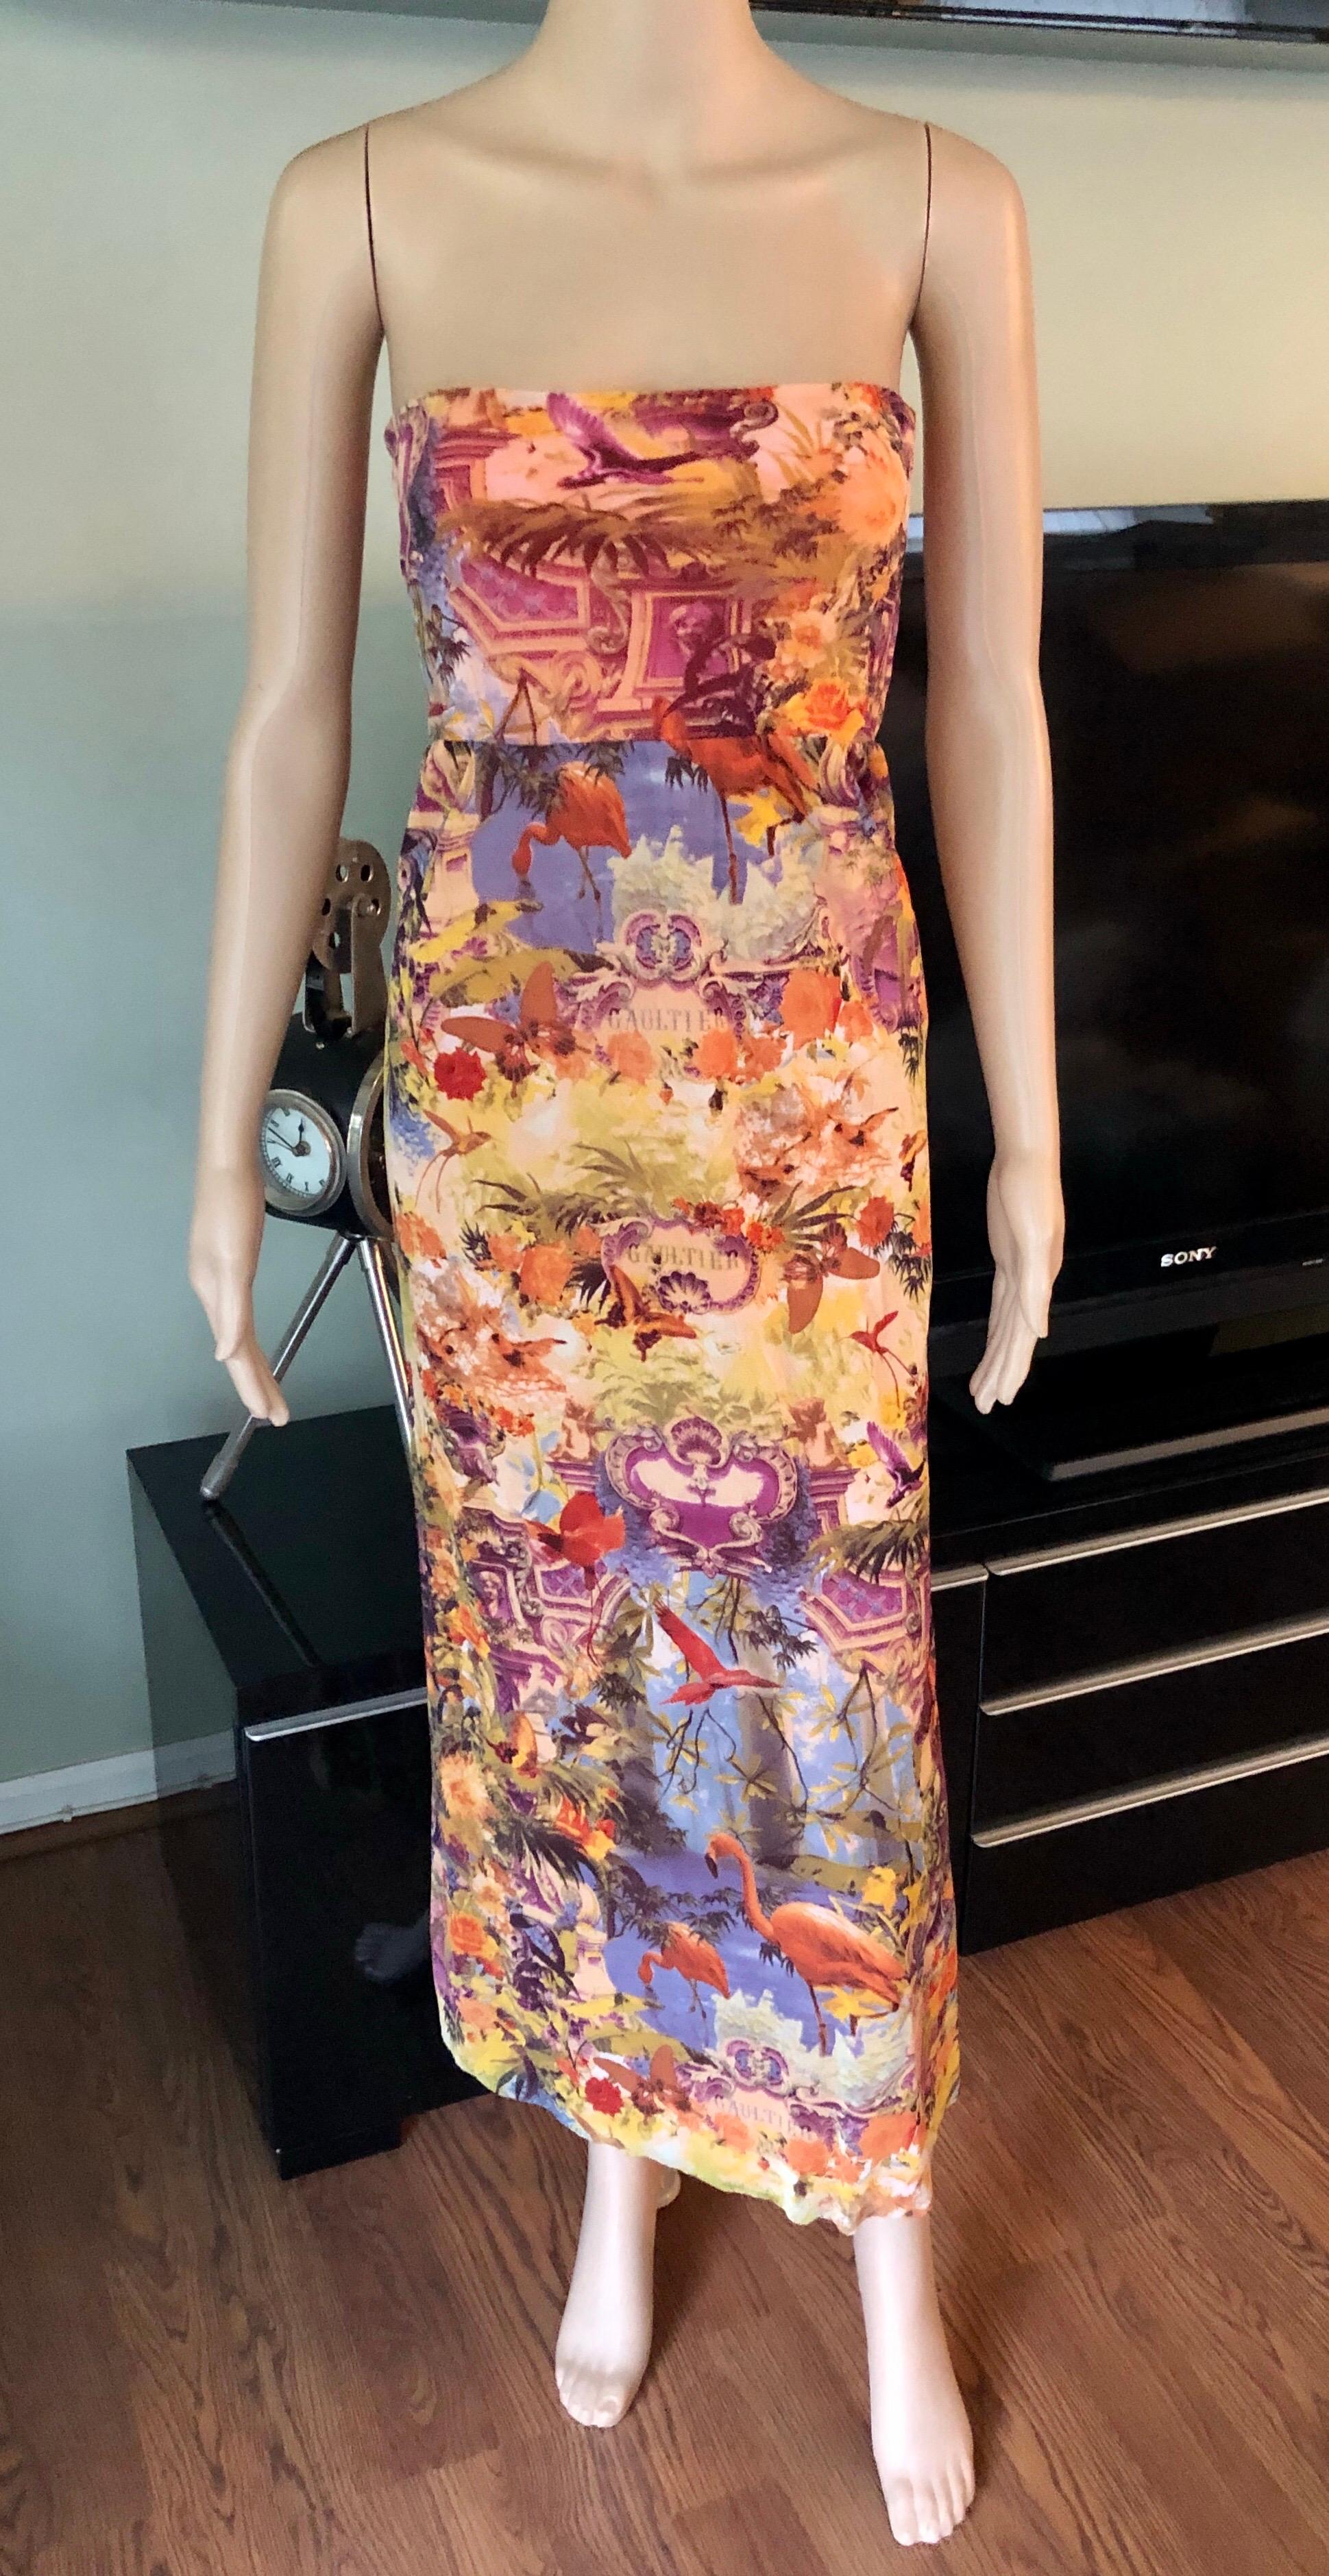 Jean Paul Gaultier Soleil Tropical Flamingo Print Logo Semi-Sheer Mesh Maxi Skirt Dress Size S

Please note this piece is very versatile and it could be worn as a strapless dress or a maxi skirt as shown in last two photos.